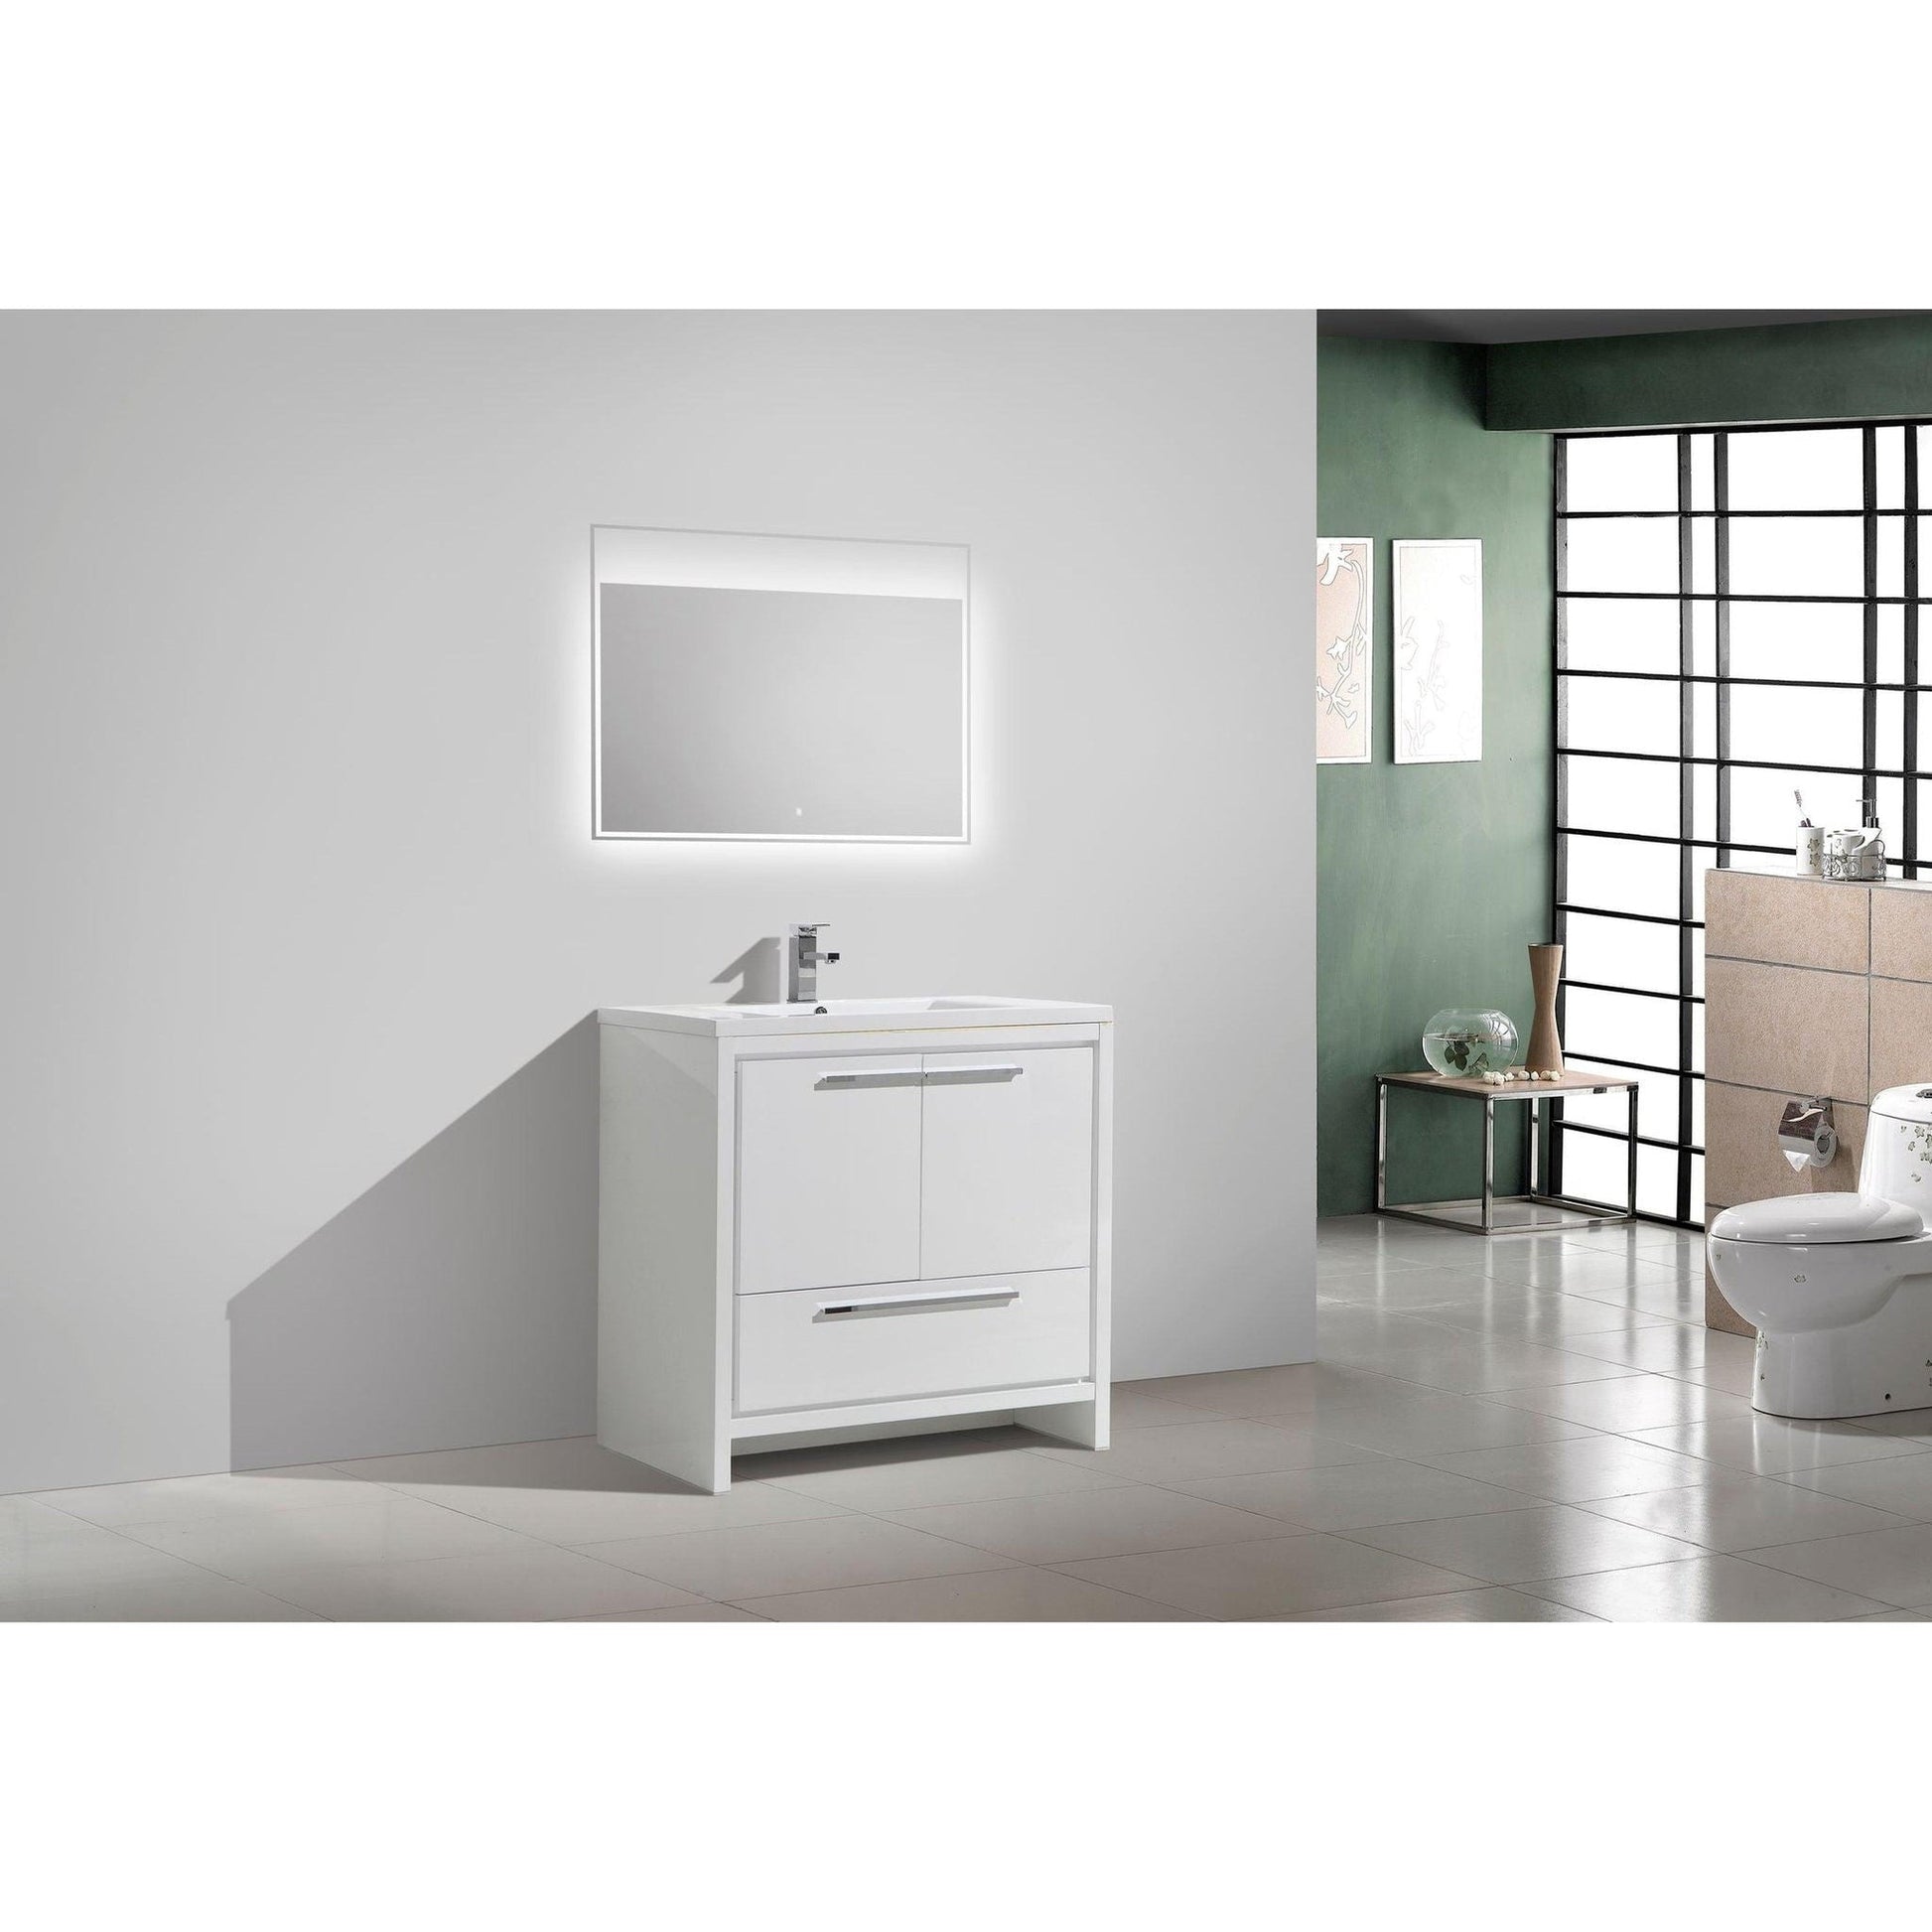 Moreno Bath Dolce 36" High Gloss White Freestanding Vanity With Single Reinforced White Acrylic Sink